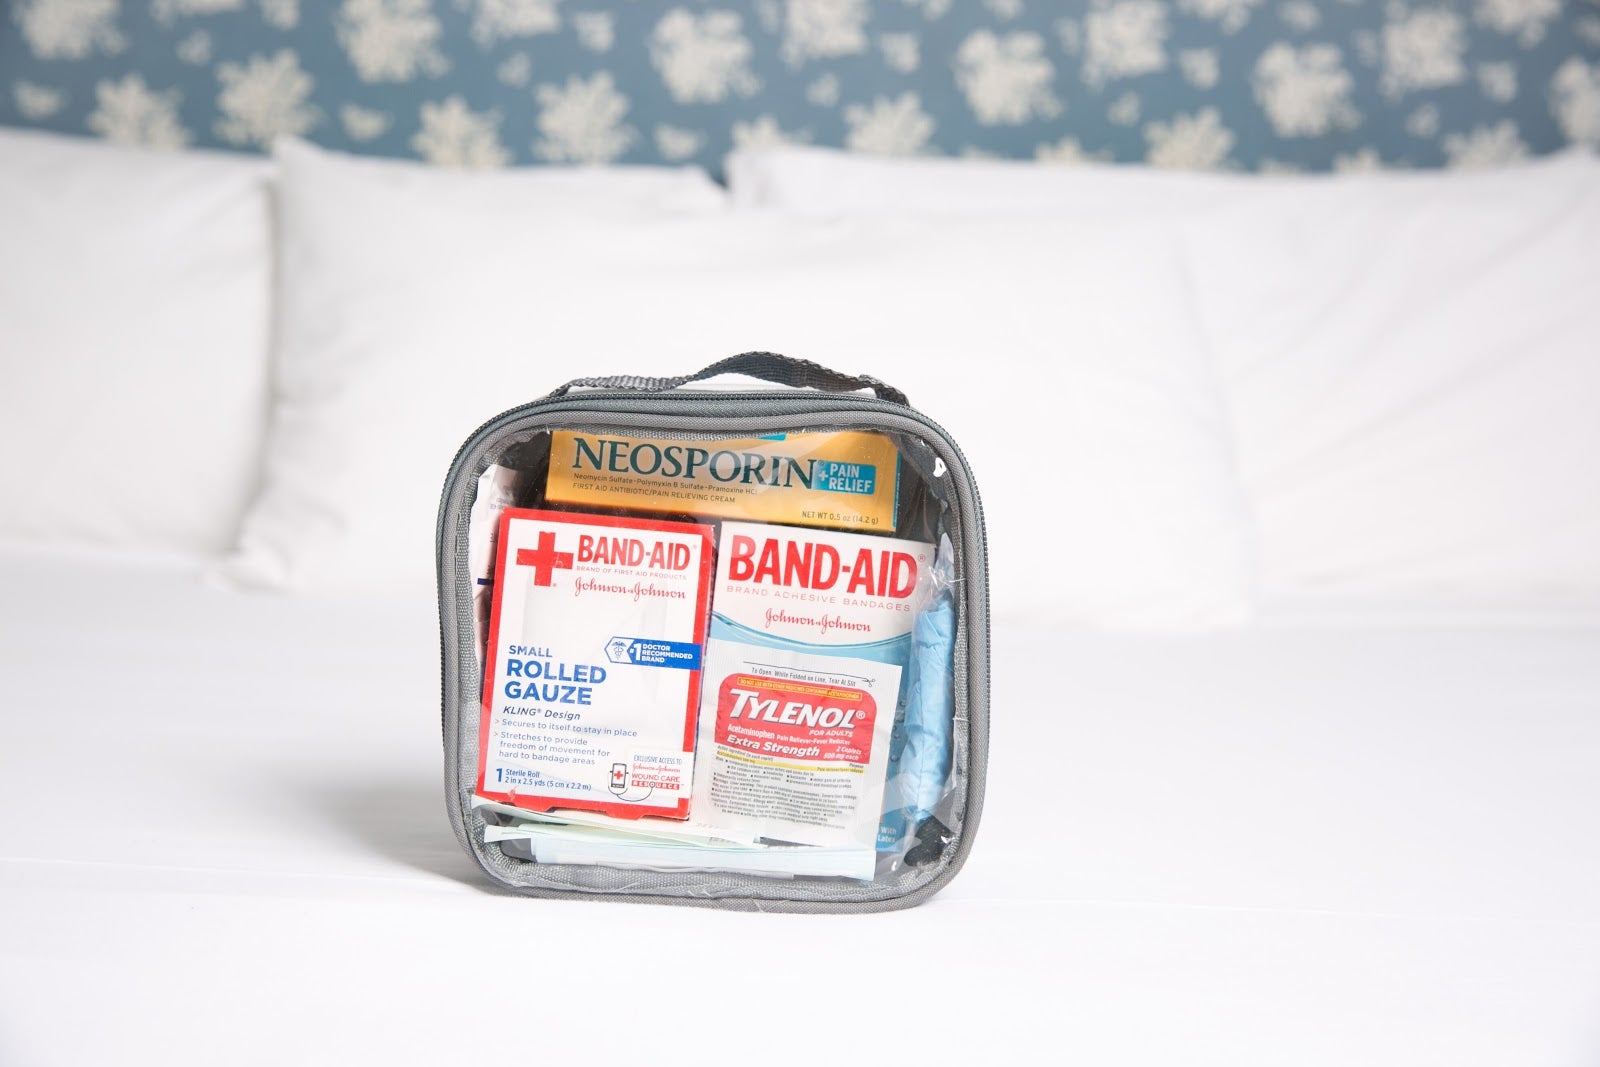 Packing first aid kit tip